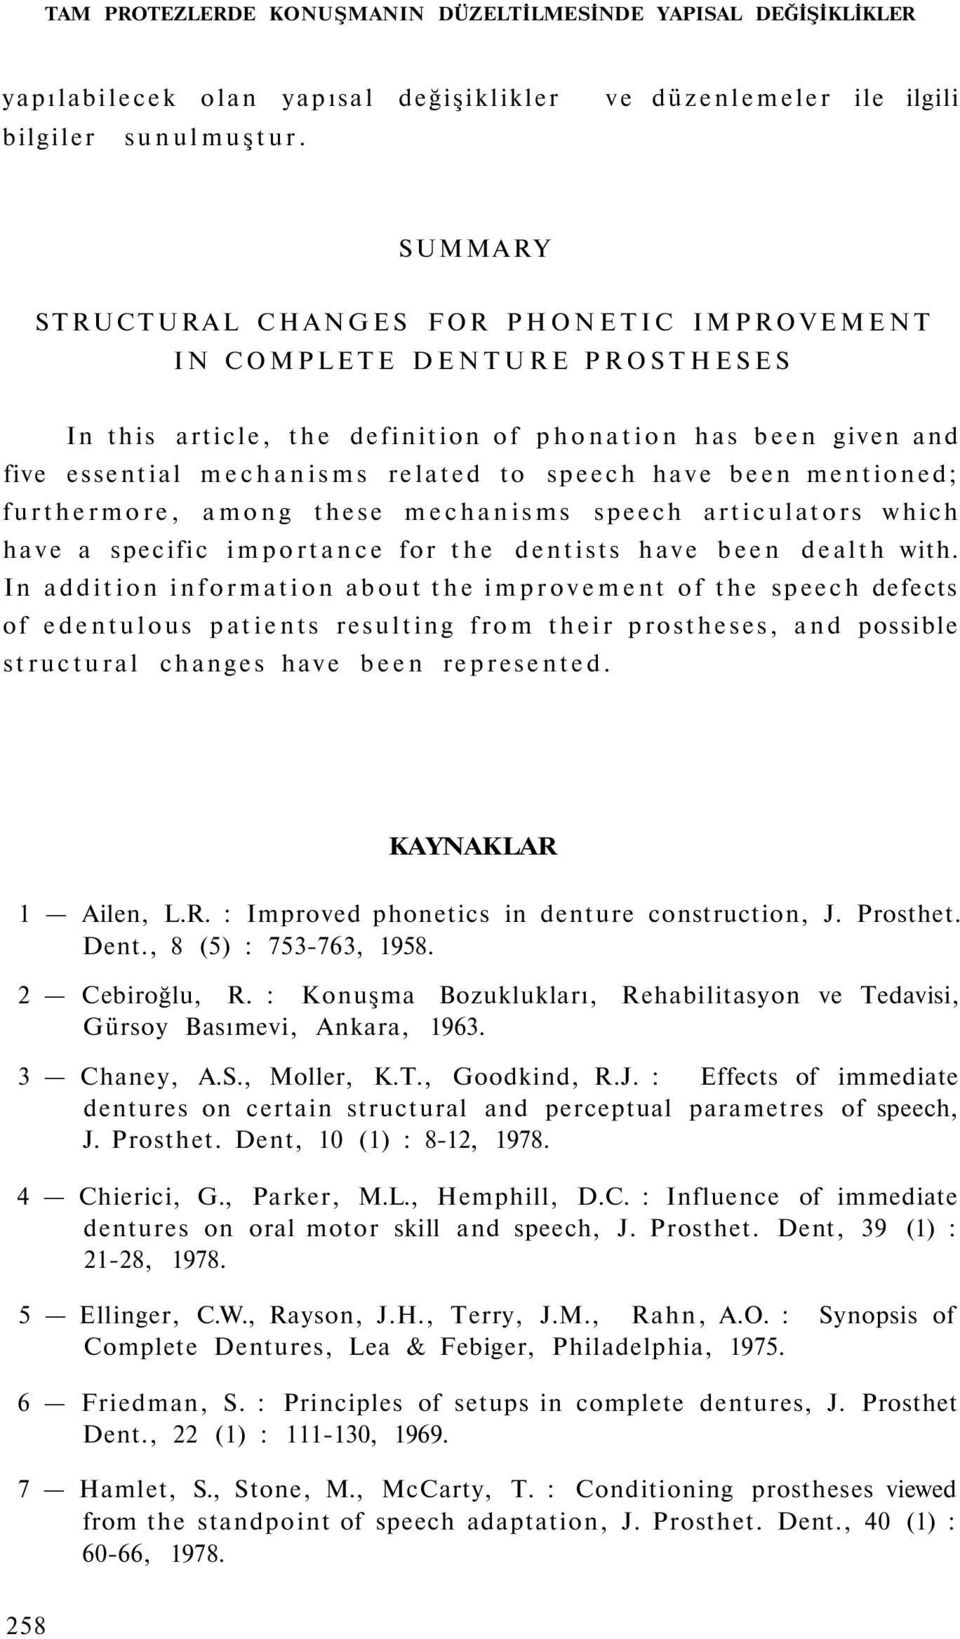 been mentioned; furthermore, among these mechanisms speech articulators which have a specific importance for the dentists have been dealth with.